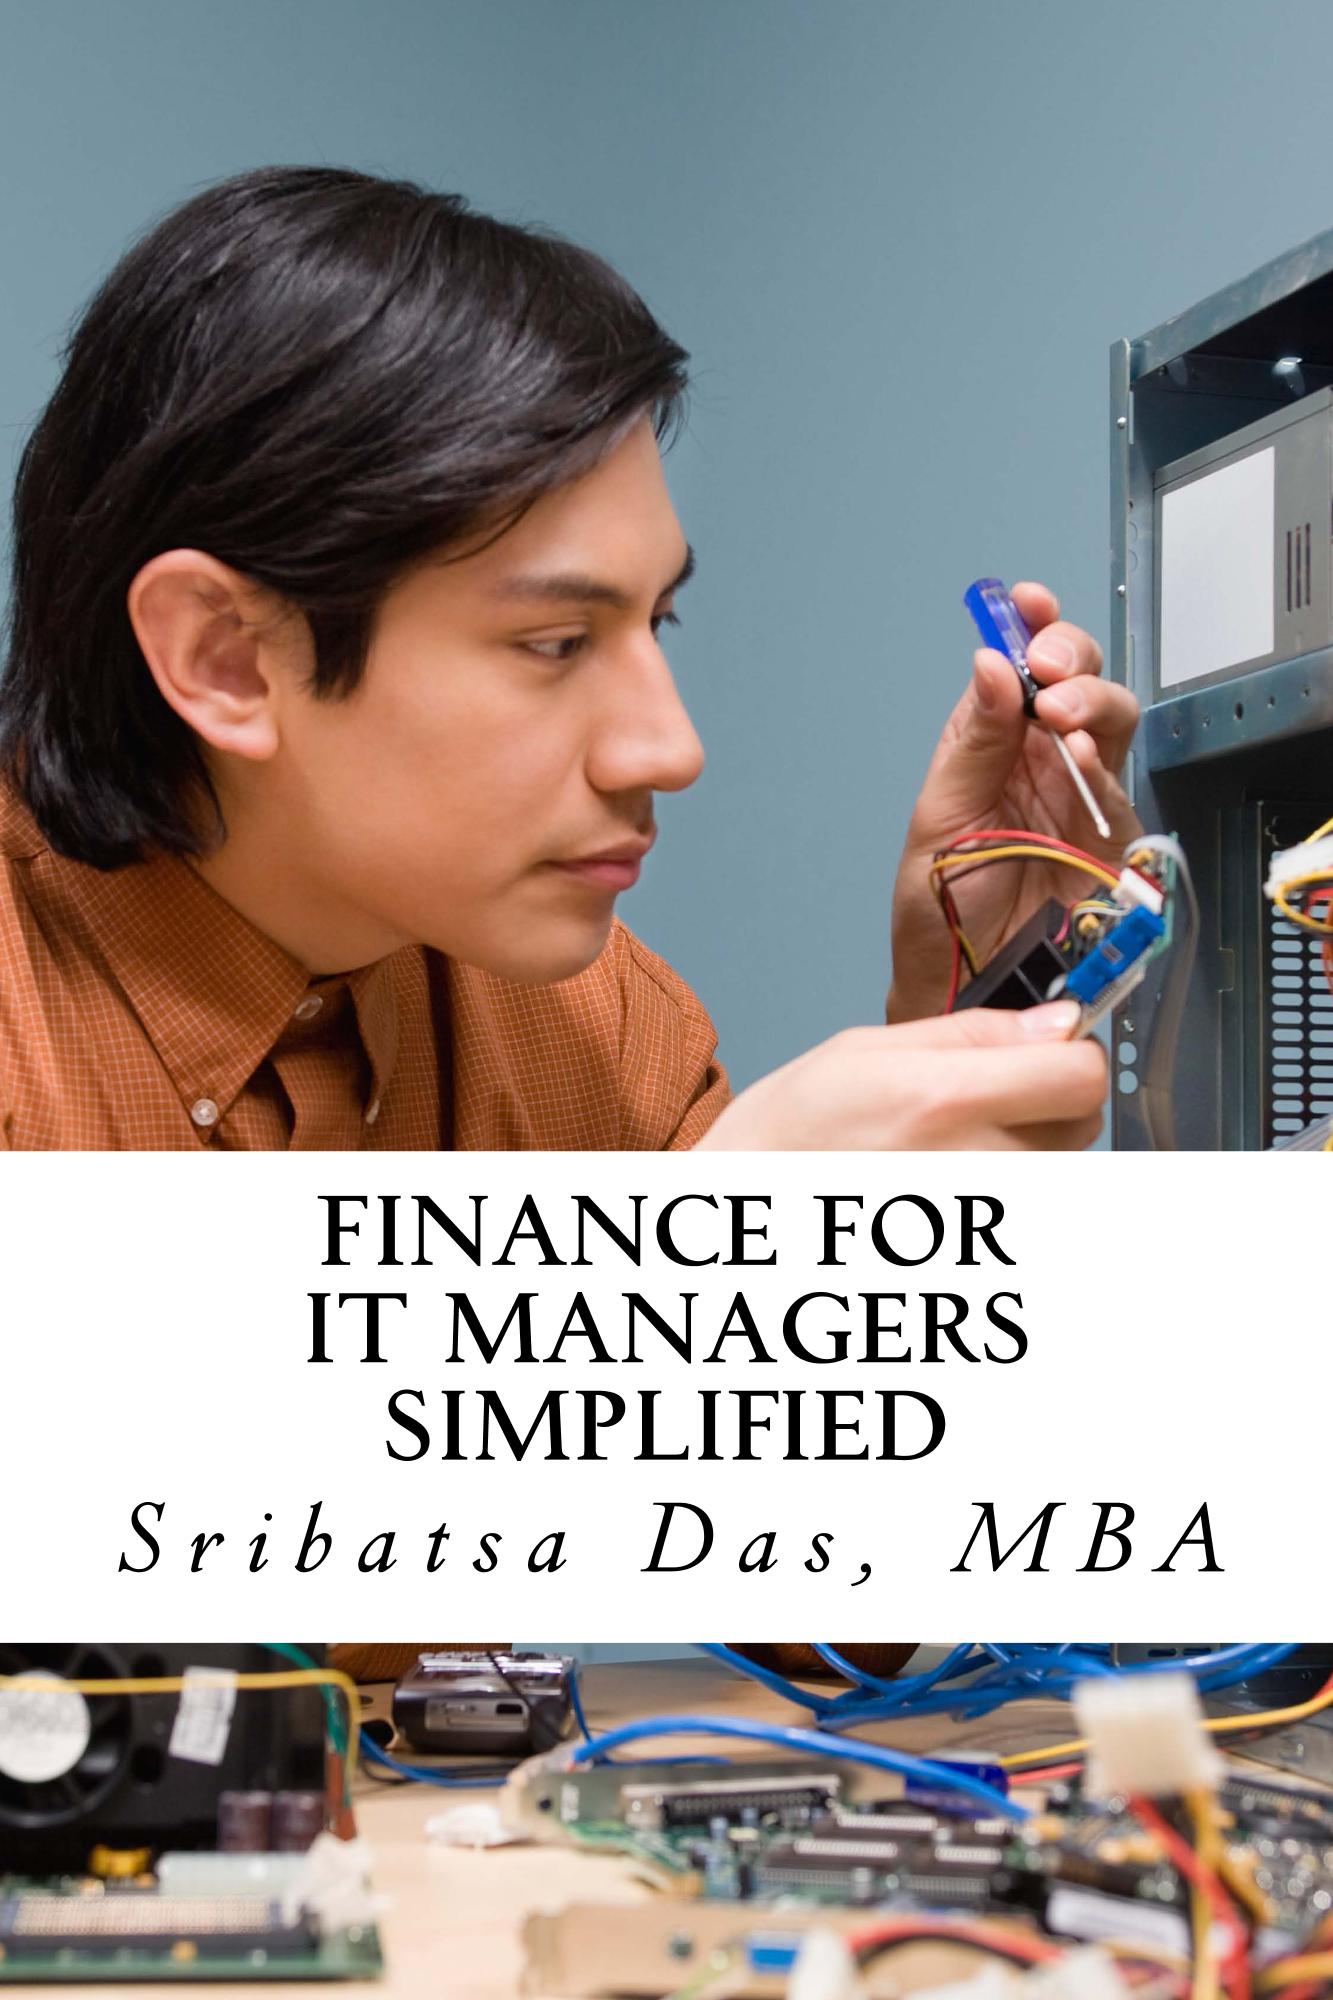 Finance for IT Managers Simplfied